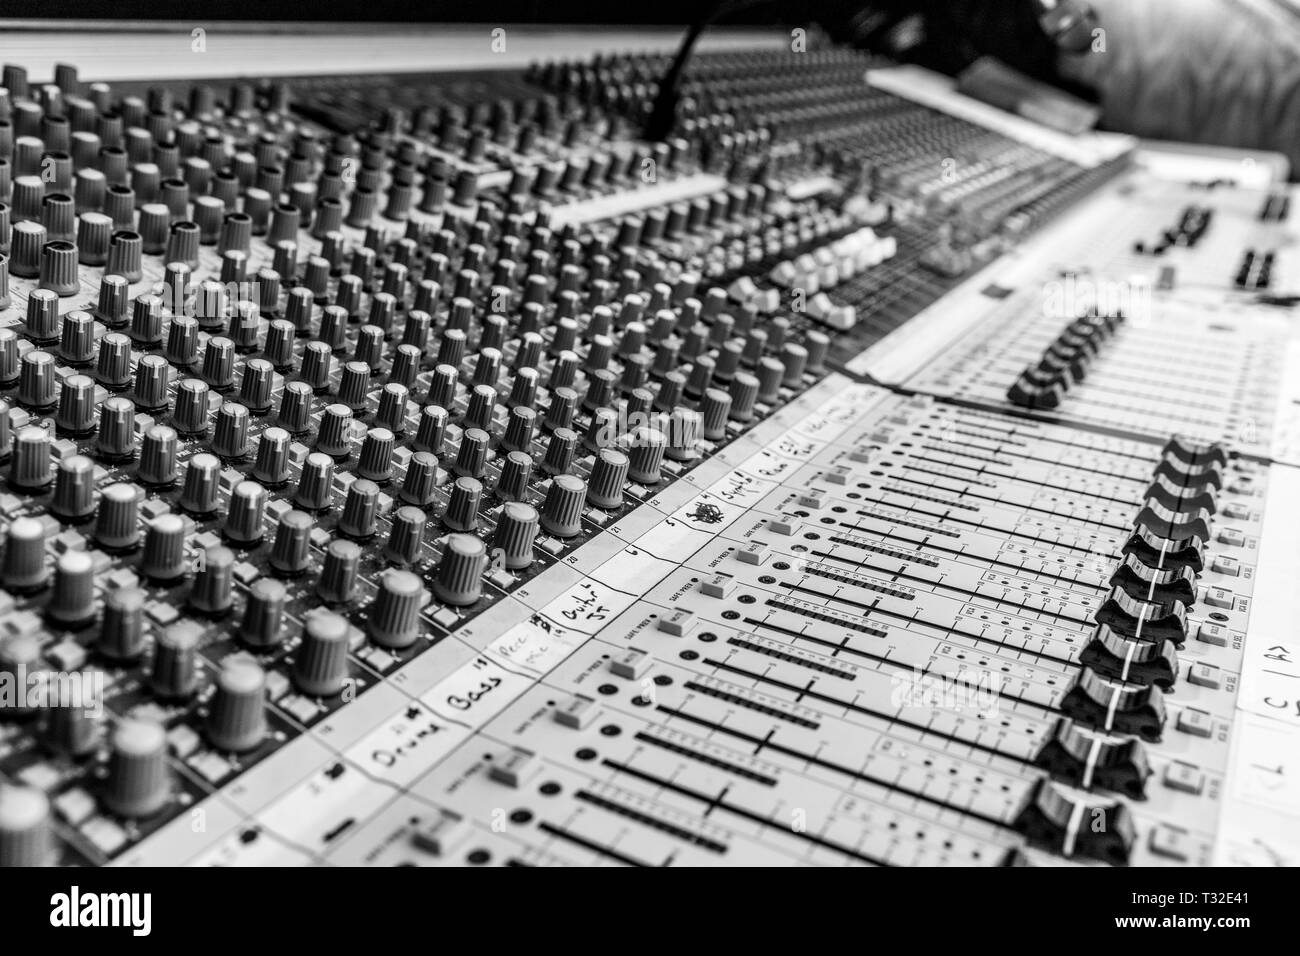 Analog sound mixing console used to mix microphones Stock Photo